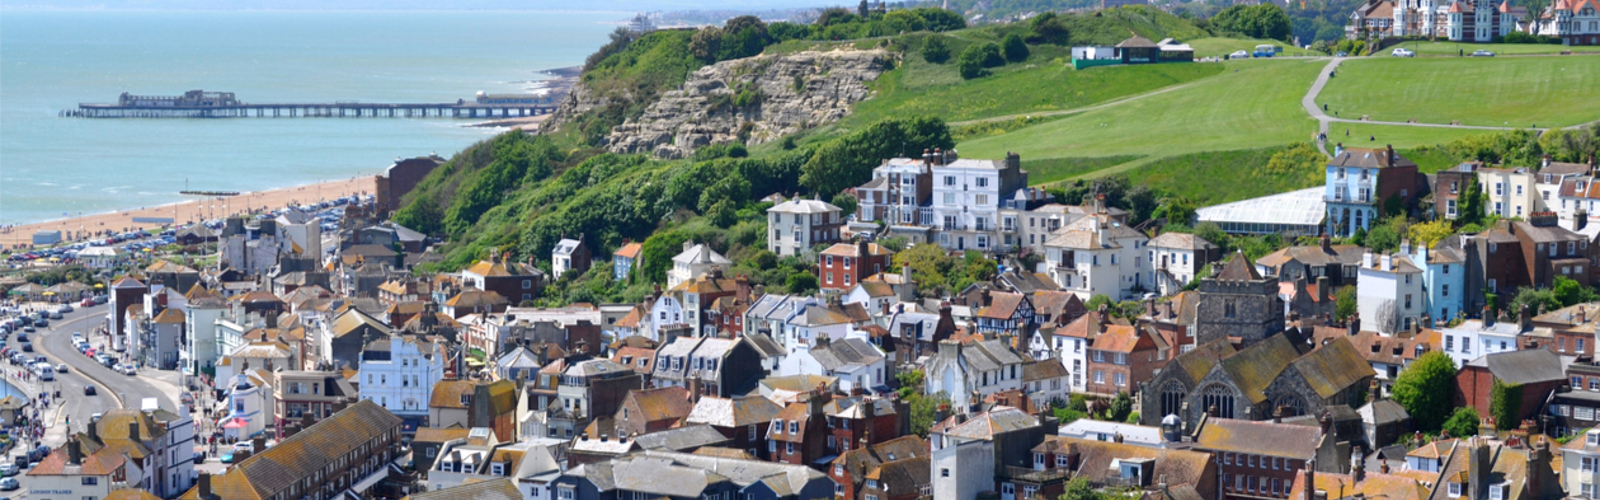 Aerial view over Hastings